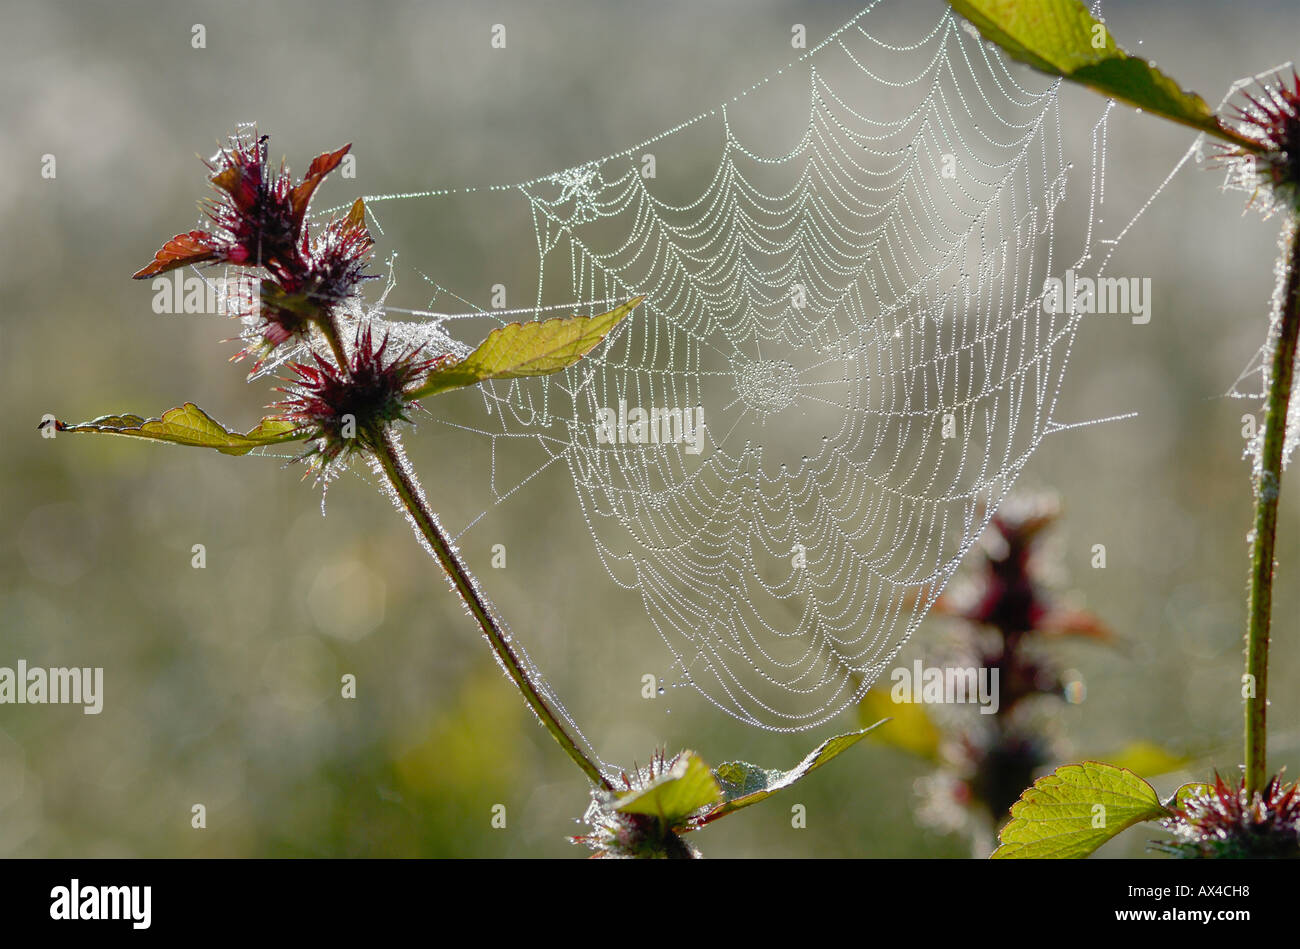 Close-Up of Spider Web Stock Photo